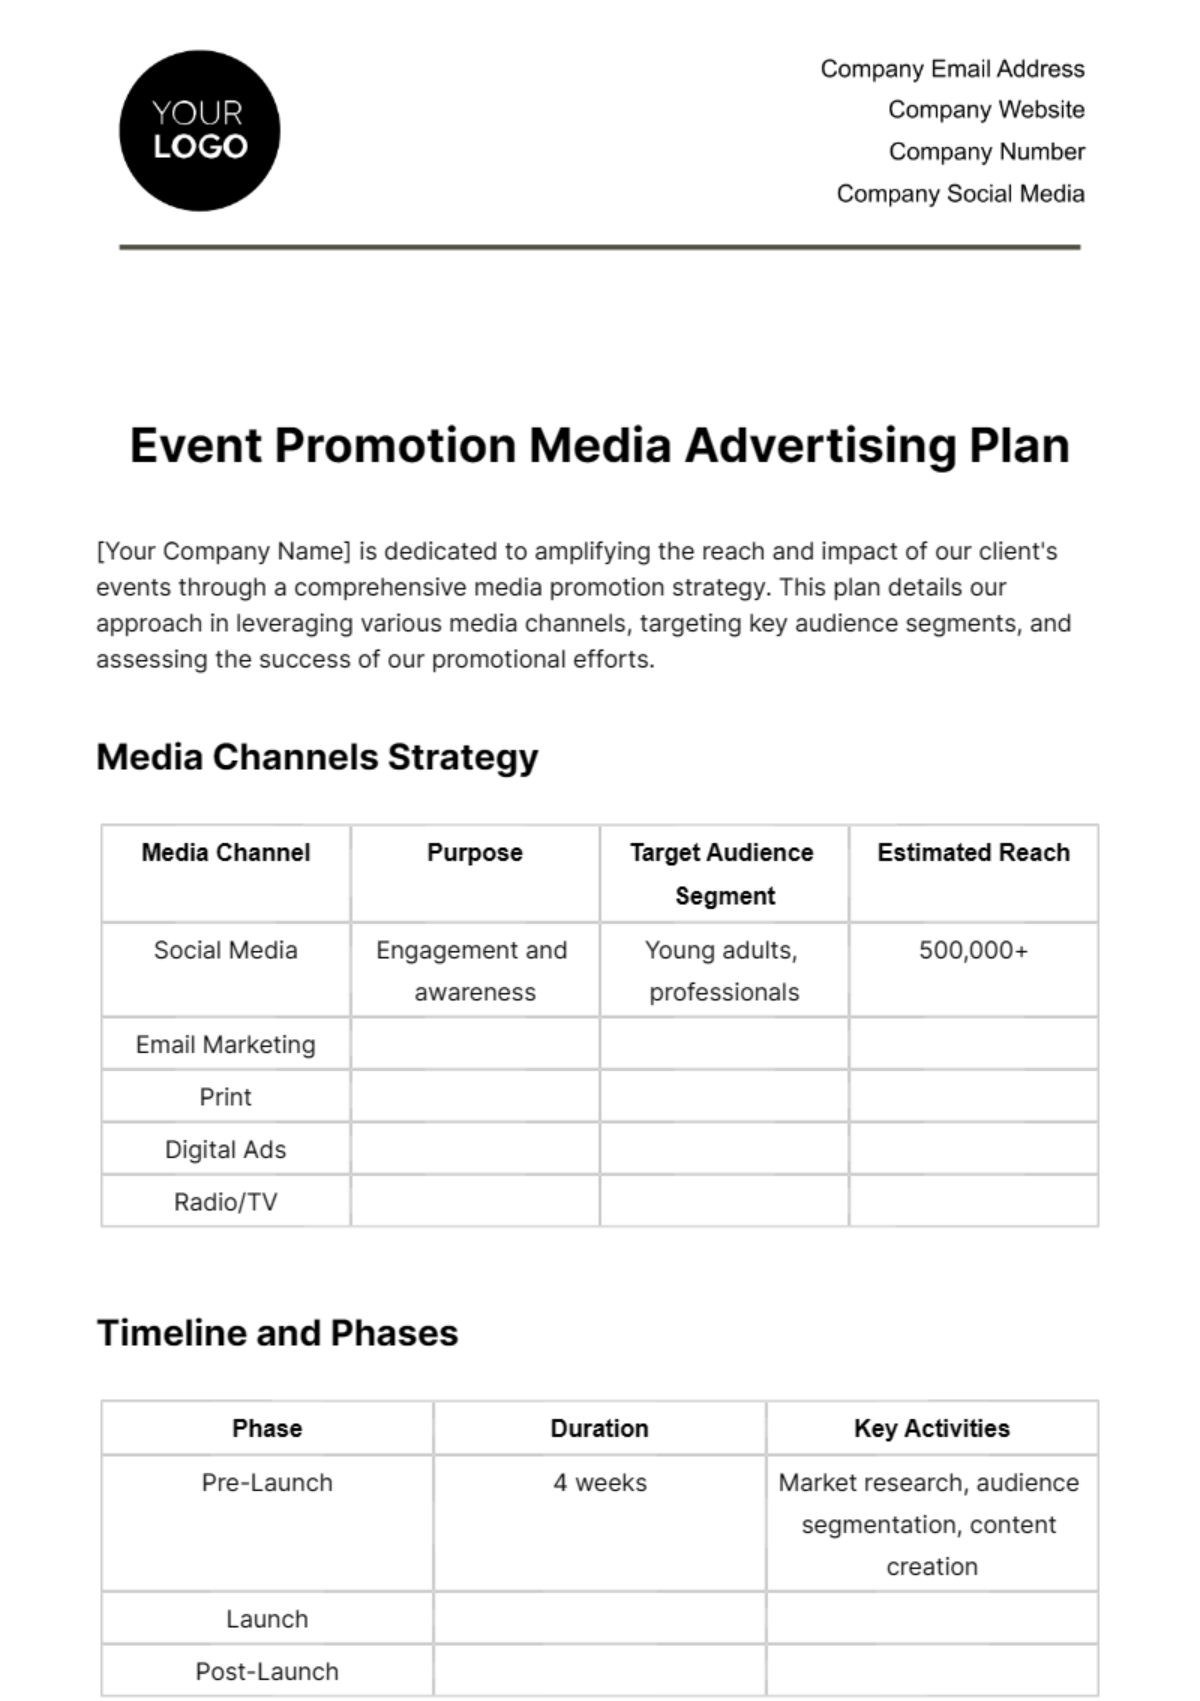 Event Promotion Media Advertising Plan Template